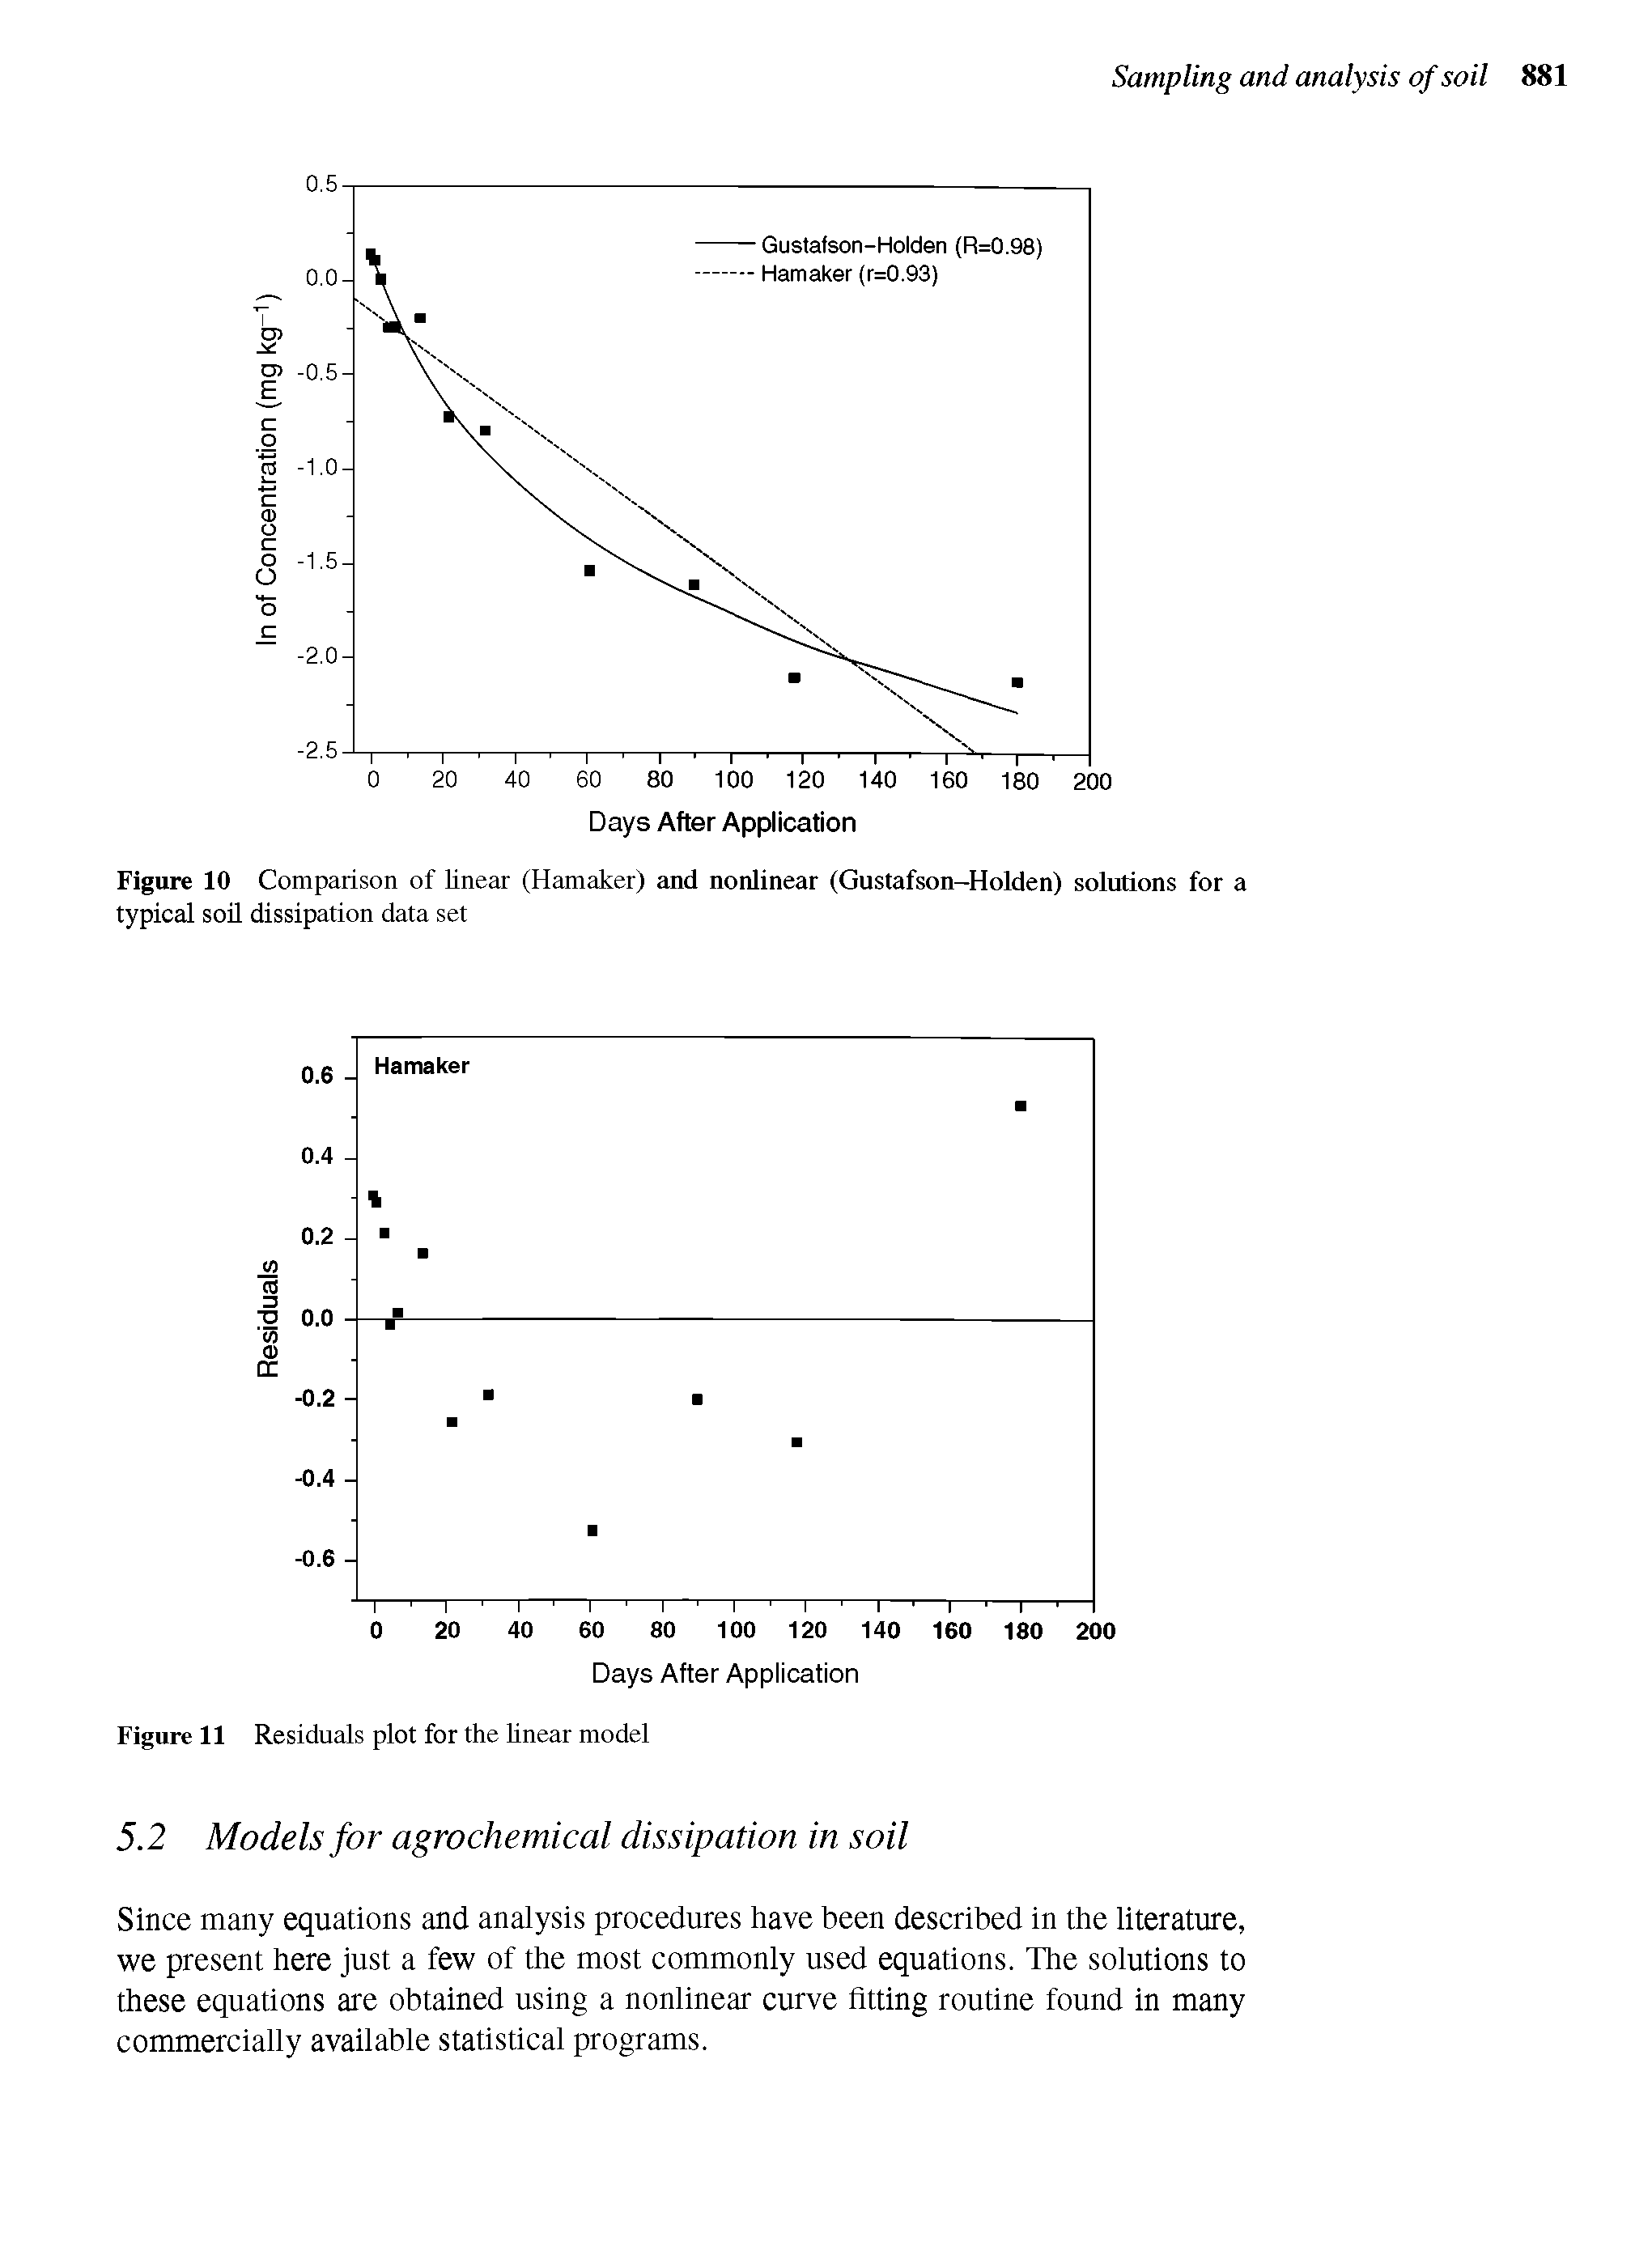 Figure 10 Comparison of linear (Hamaker) and nonlinear (Gustafson-Holden) solutions for a typical soil dissipation data set...